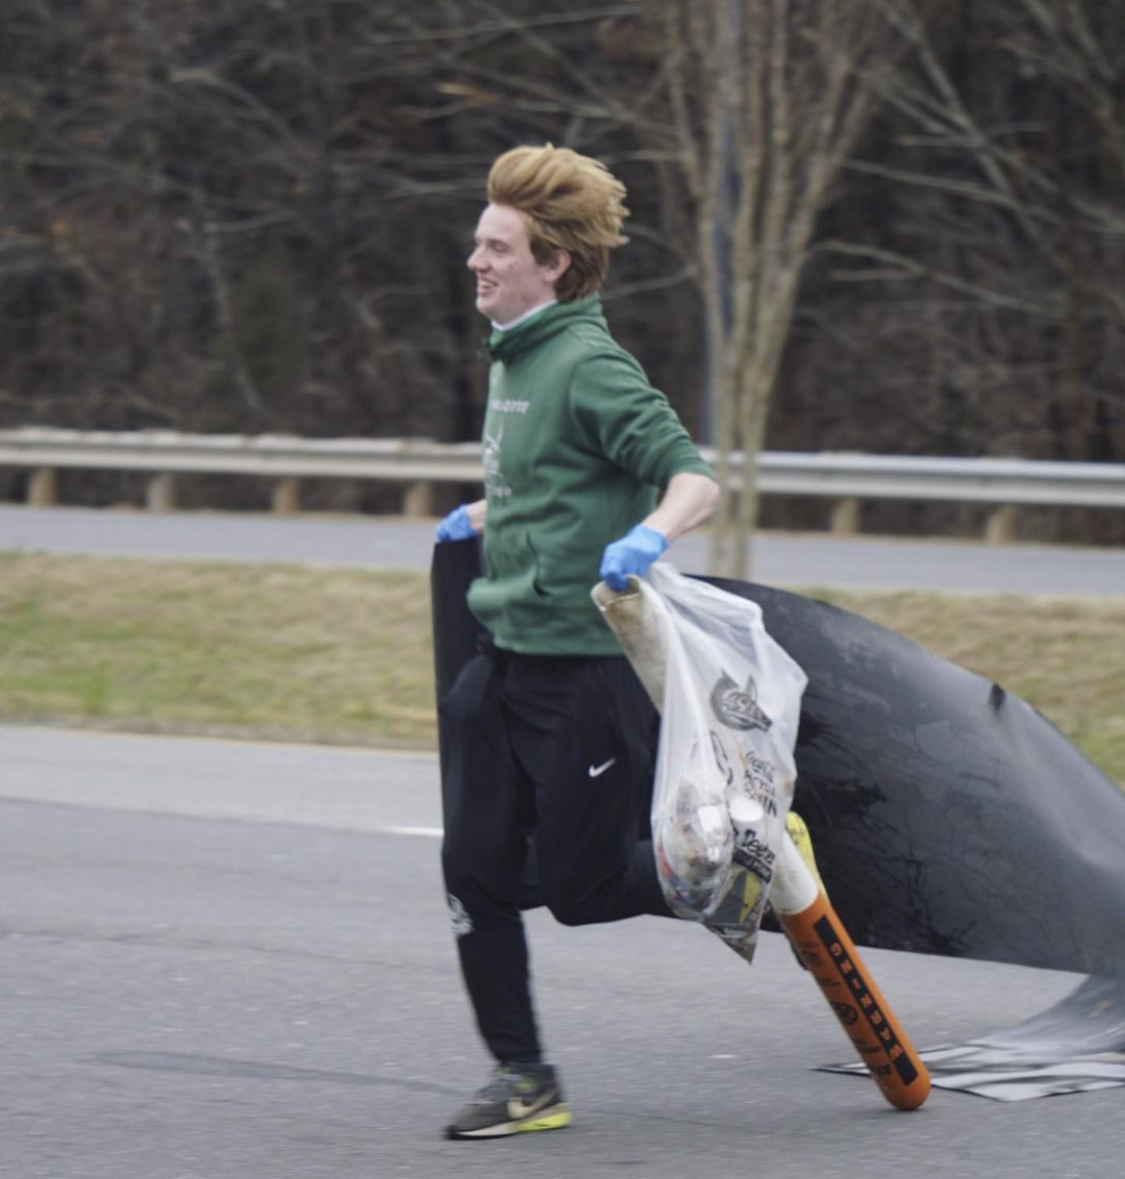 Meet Reed Blackman. He is a member of the @CharlotteTFXC Reed is fast. Fast at running, fast at picking up trash. We like your style! @CharlotteSAAC  #gettingafteritinthecommunity #communityengagment #beahelper #helperhelper #trashcleanup #helperoftheday